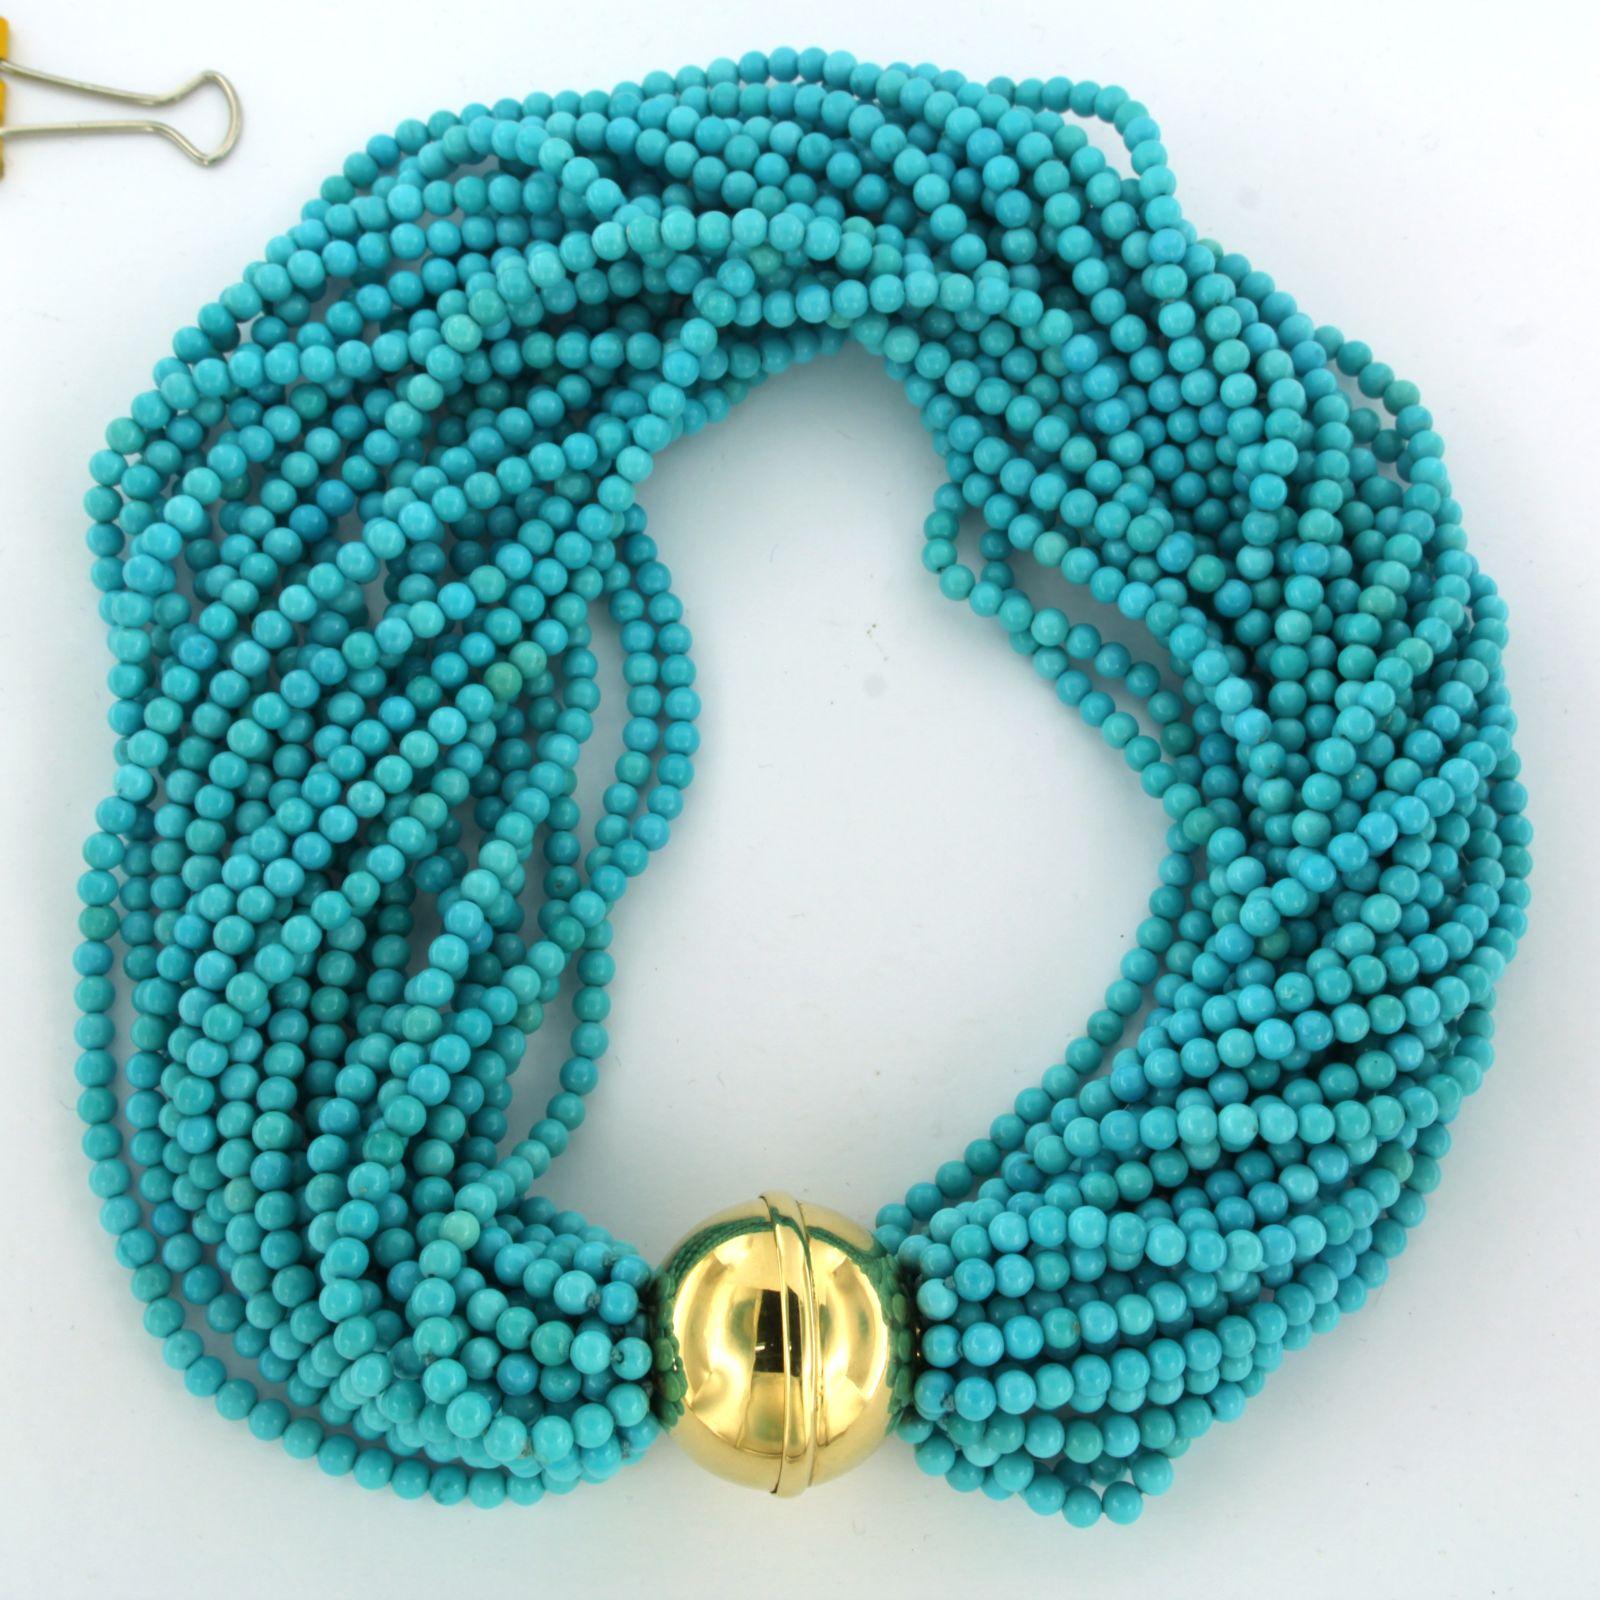 Necklace with turquoise beads on a 18k yellow gold lock For Sale 2